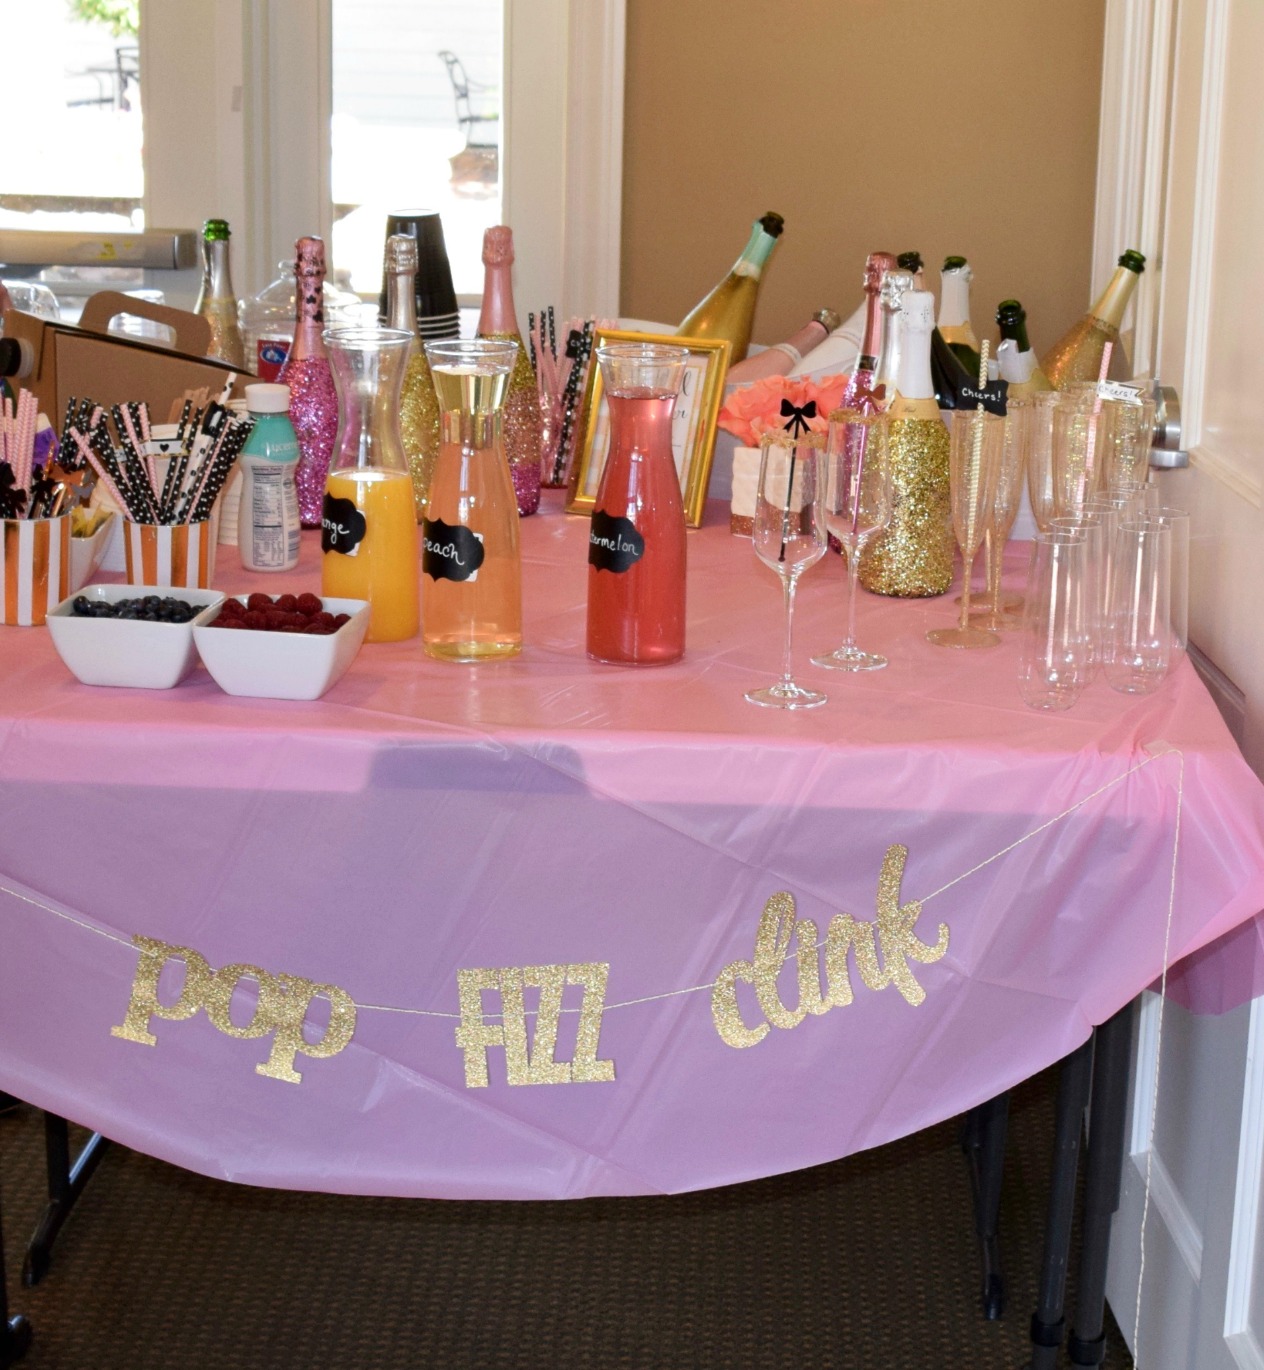 So There.: Christy's Kate Spade Themed Bridal Shower!